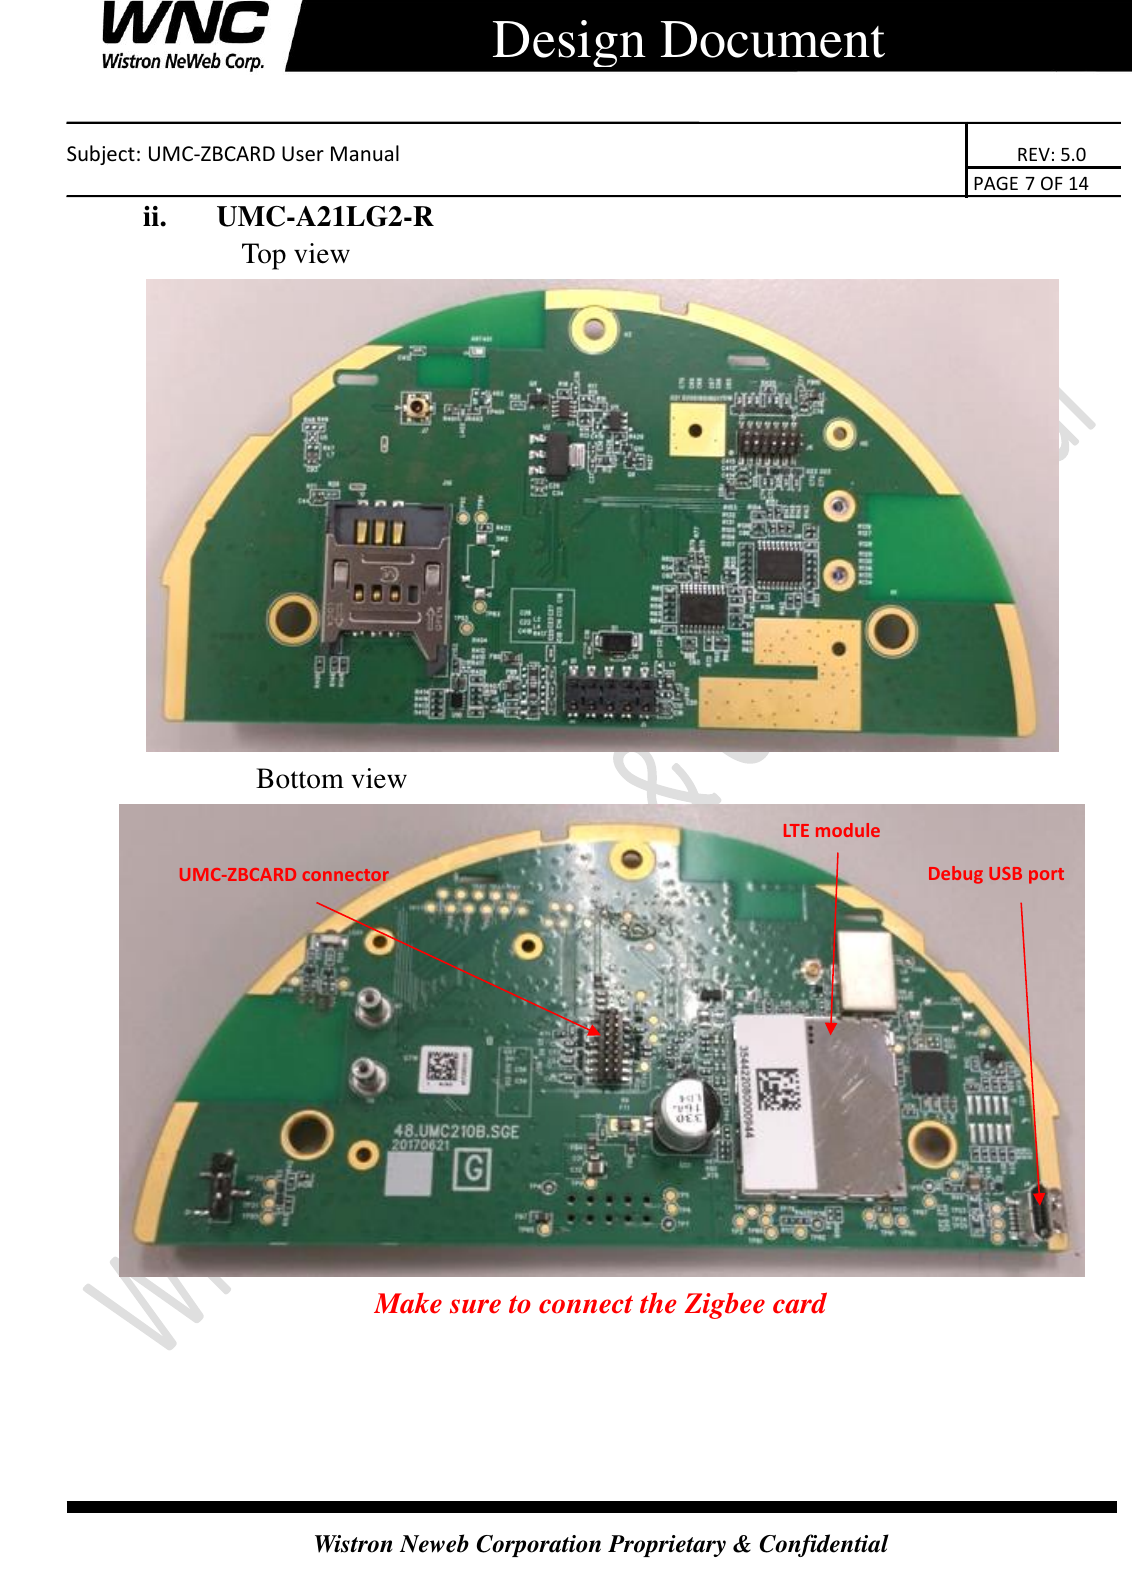    Subject: UMC-ZBCARD User Manual                                                                      REV: 5.0                                                                                        PAGE 7 OF 14  Wistron Neweb Corporation Proprietary &amp; Confidential      Design Document ii. UMC-A21LG2-R Top view    Bottom view  Make sure to connect the Zigbee card Debug USB port UMC-ZBCARD connector LTE module 